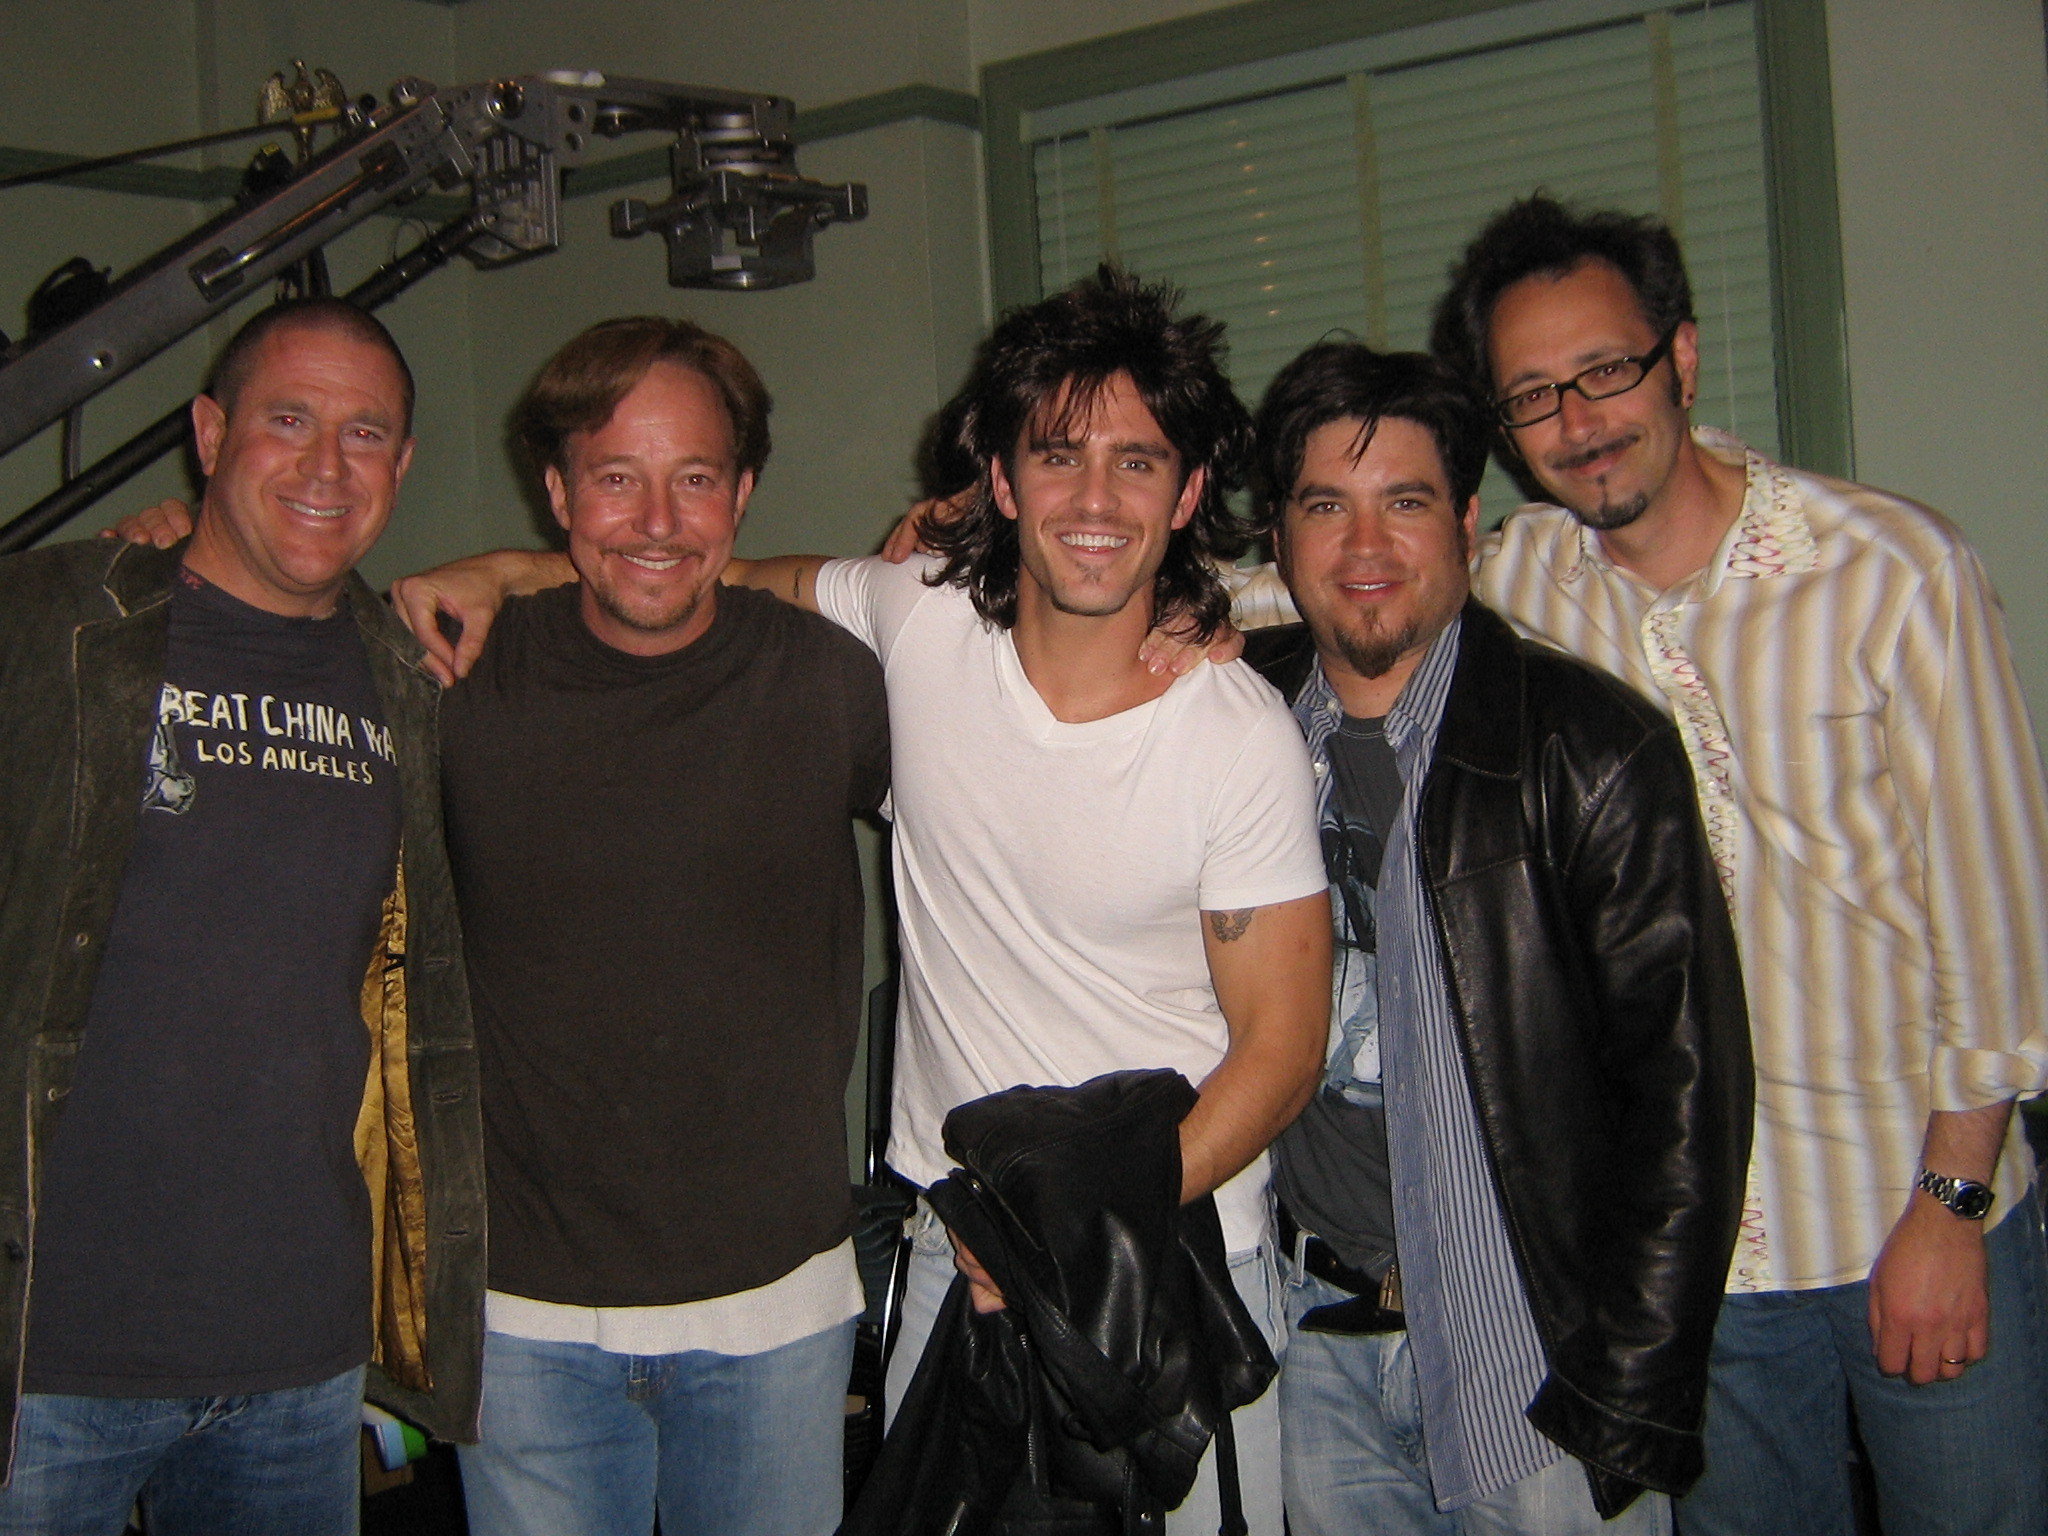 On the set of Julie Reno, Bounty Hunter (from L to R) Sandy Grushow, Michael Ross, Spencer Hill, Paul Shapiro, and Lev Spiro.